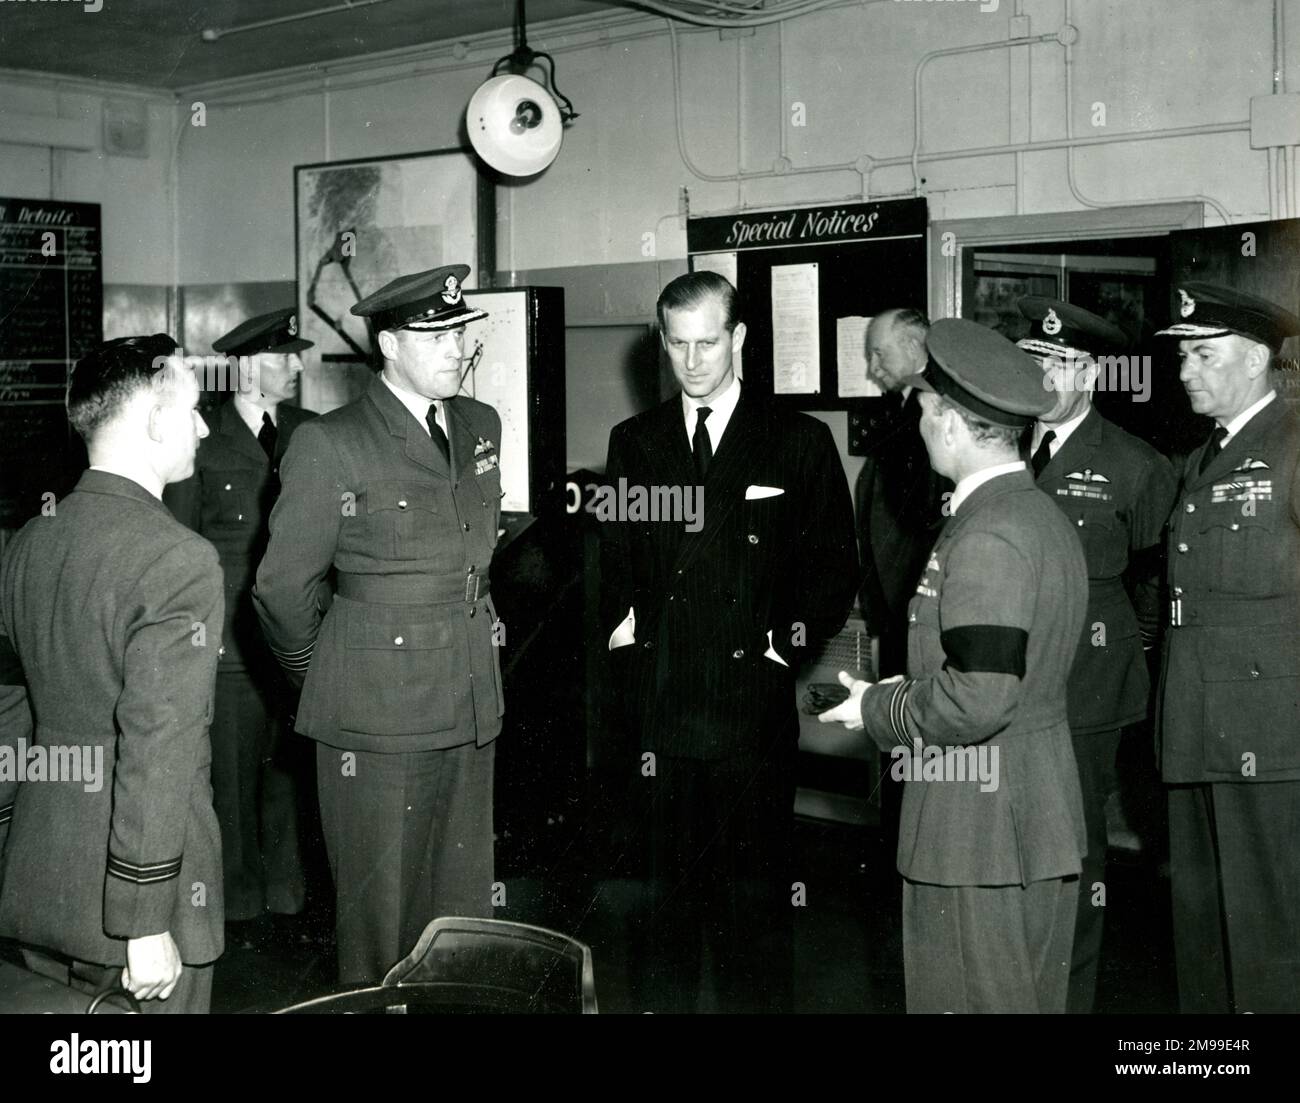 Prince Philip visiting RAF officers. Stock Photo